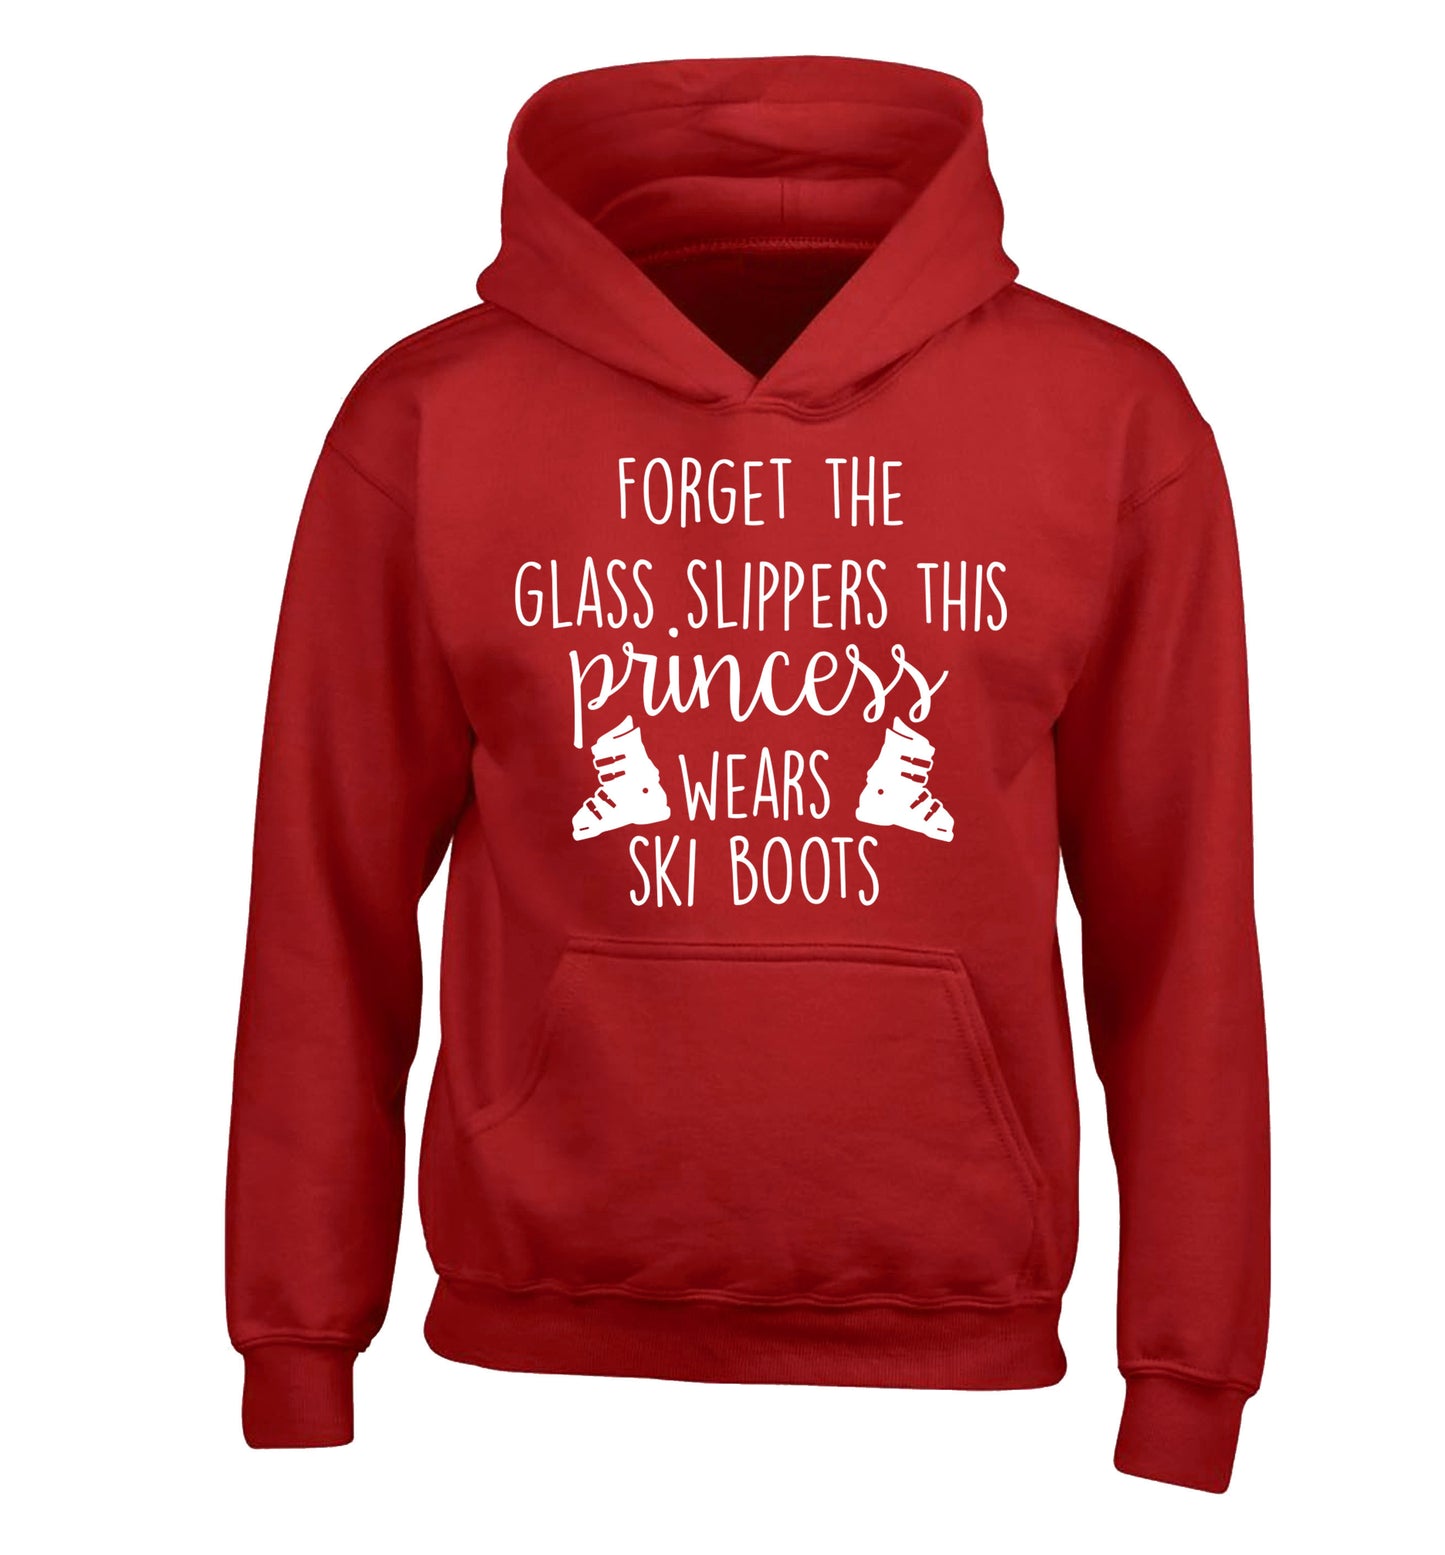 Forget the glass slippers this princess wears ski boots children's red hoodie 12-14 Years